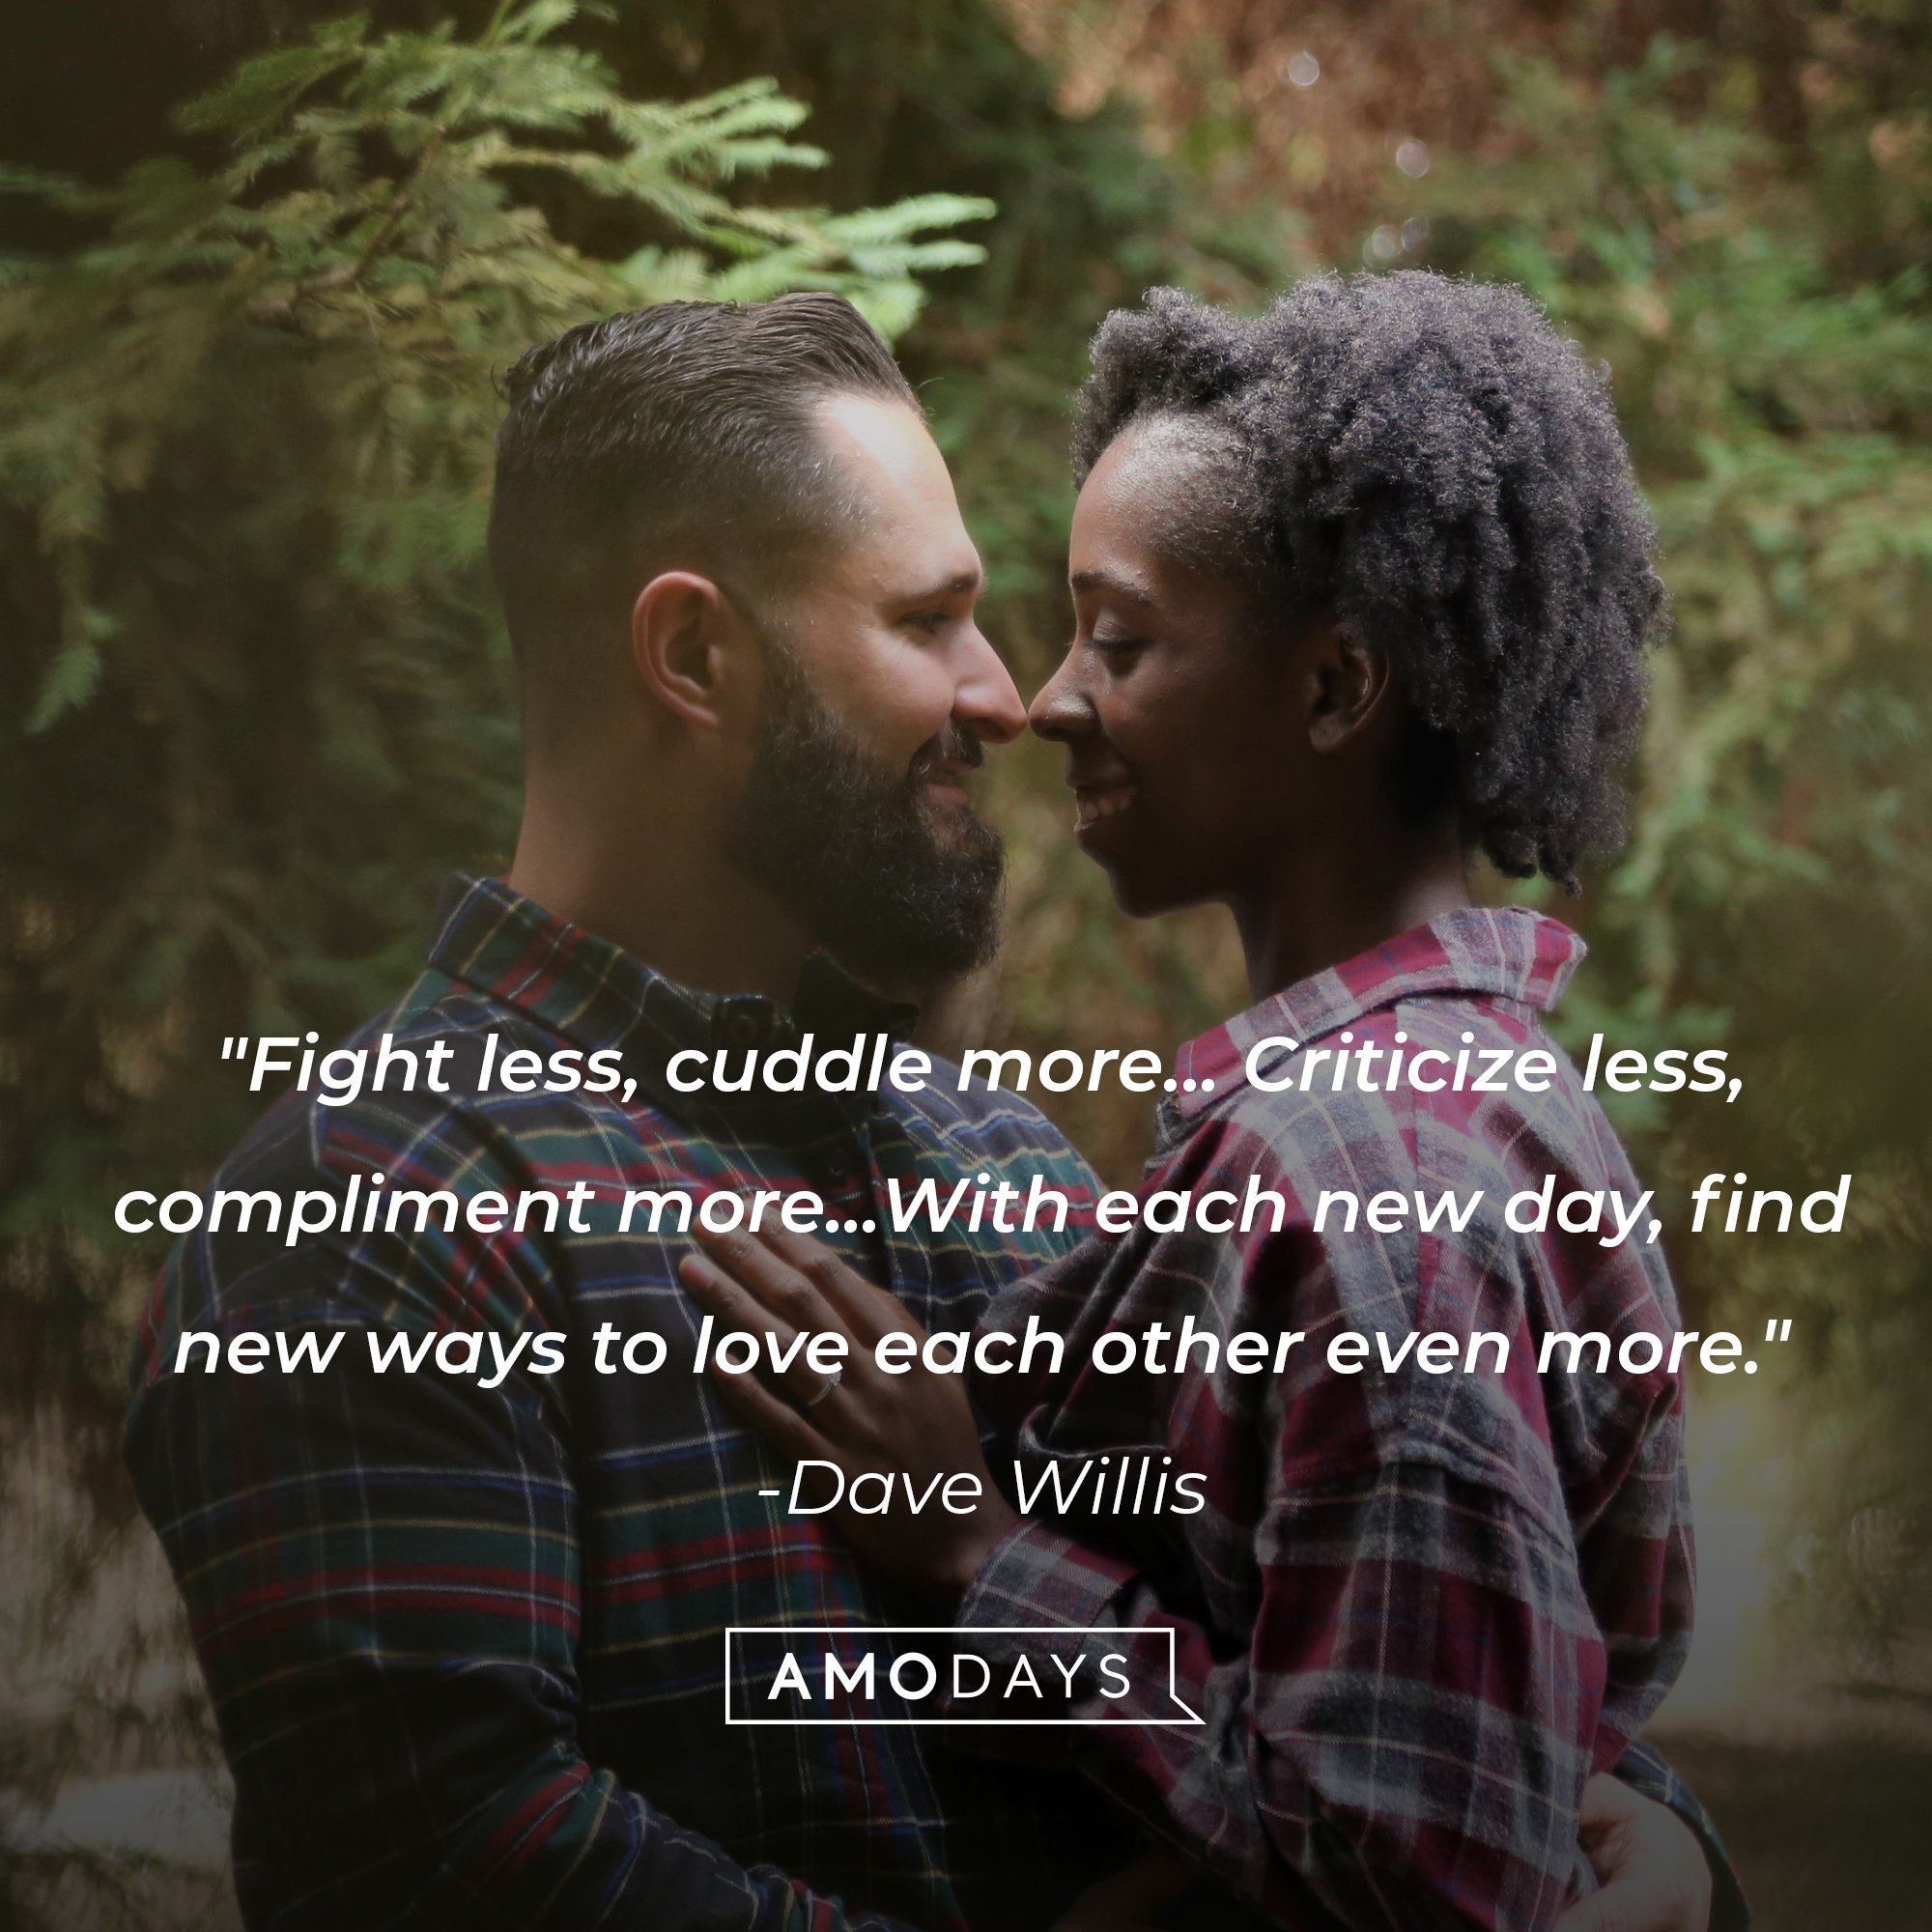 Dave Willis's quote: "Fight less, cuddle more... Criticize less, compliment more... With each new day, find new ways to love each other even more." | Image: AmoDays